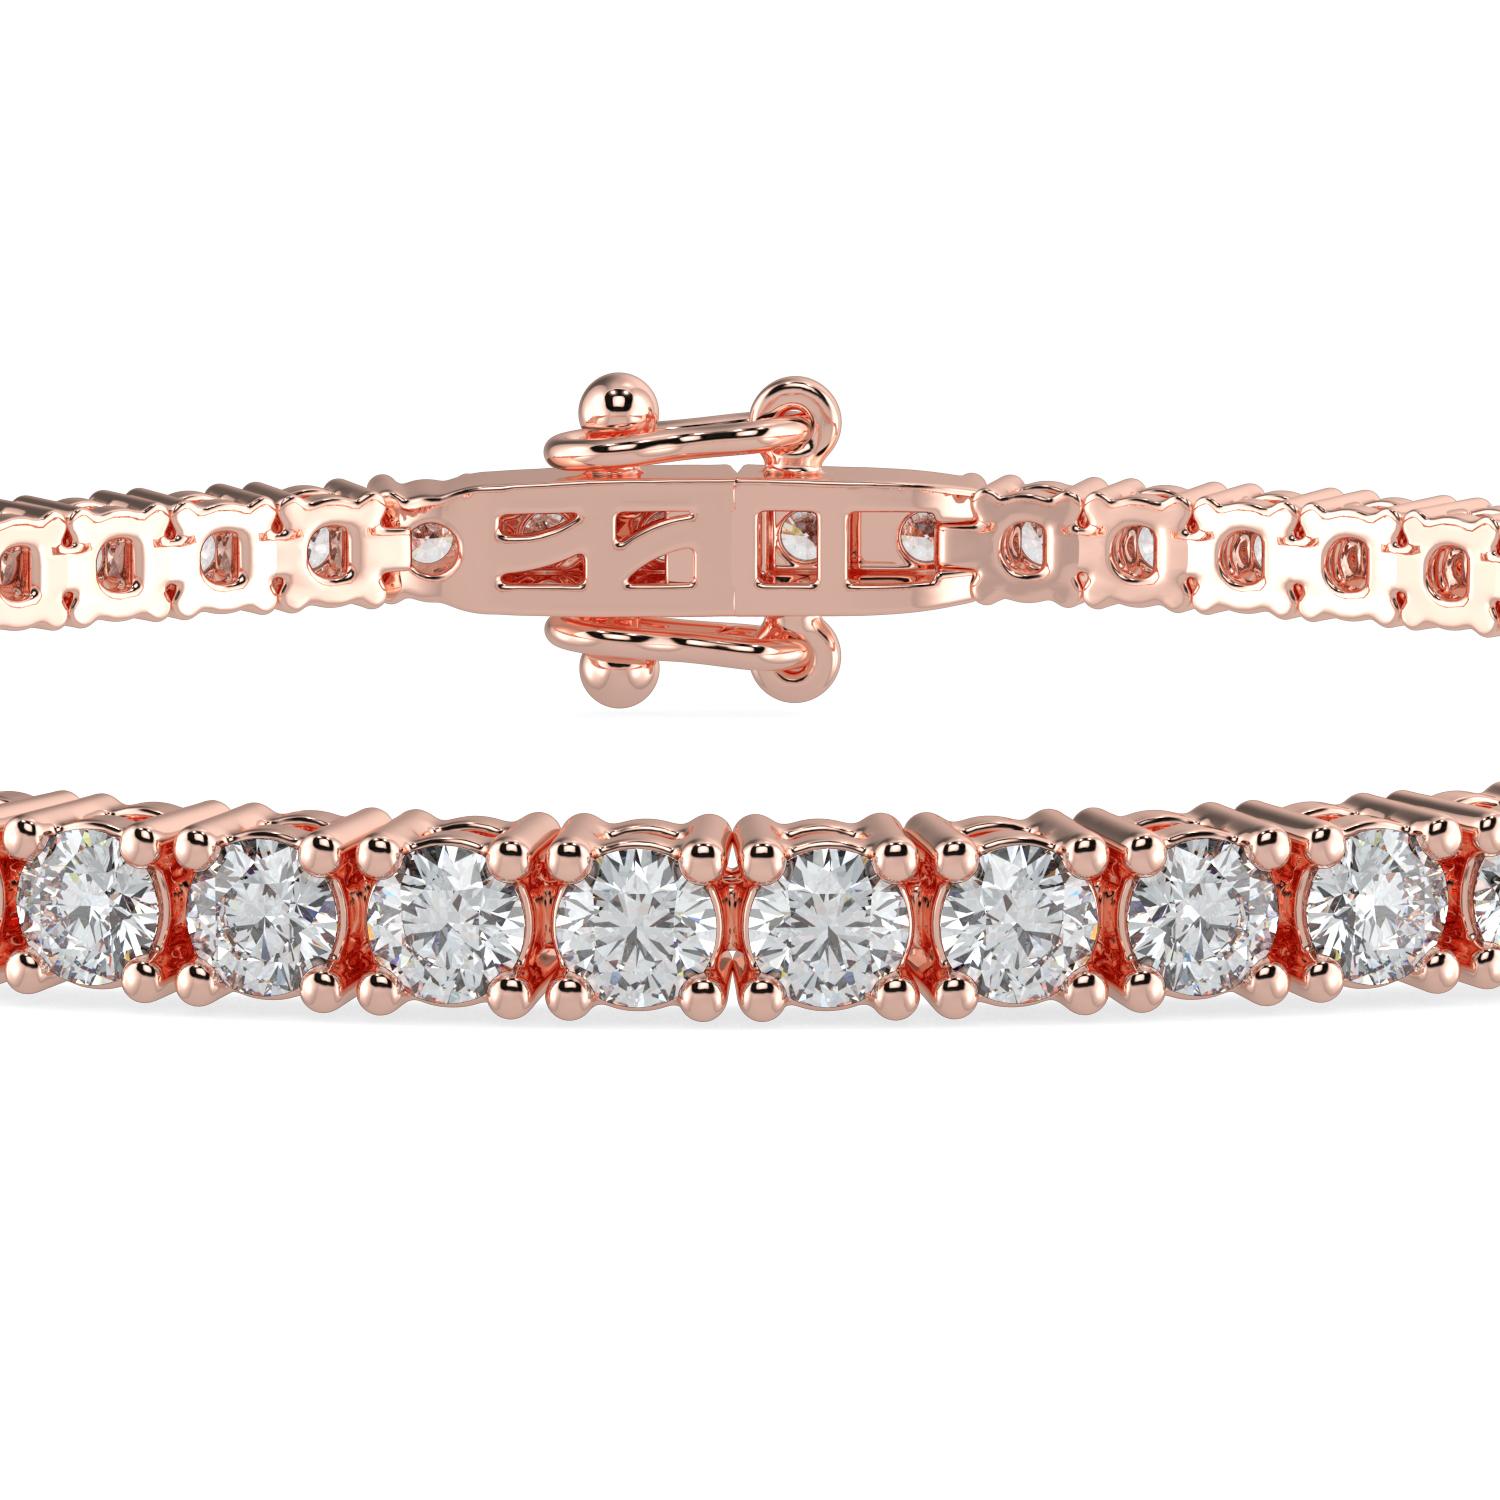 4.00 Carat Round Cut GH-SI Natural Diamond Classic Tennis Bracelet 4 Prong 14K Rose Gold for Women

Specification
Brand: AAMIAA
Length: 7 Inches 
Color: GH
Carat Weight:4CTW
Clarity: SI

LUXURIOUS AND LASTING- Our bracelets are a luxurious and